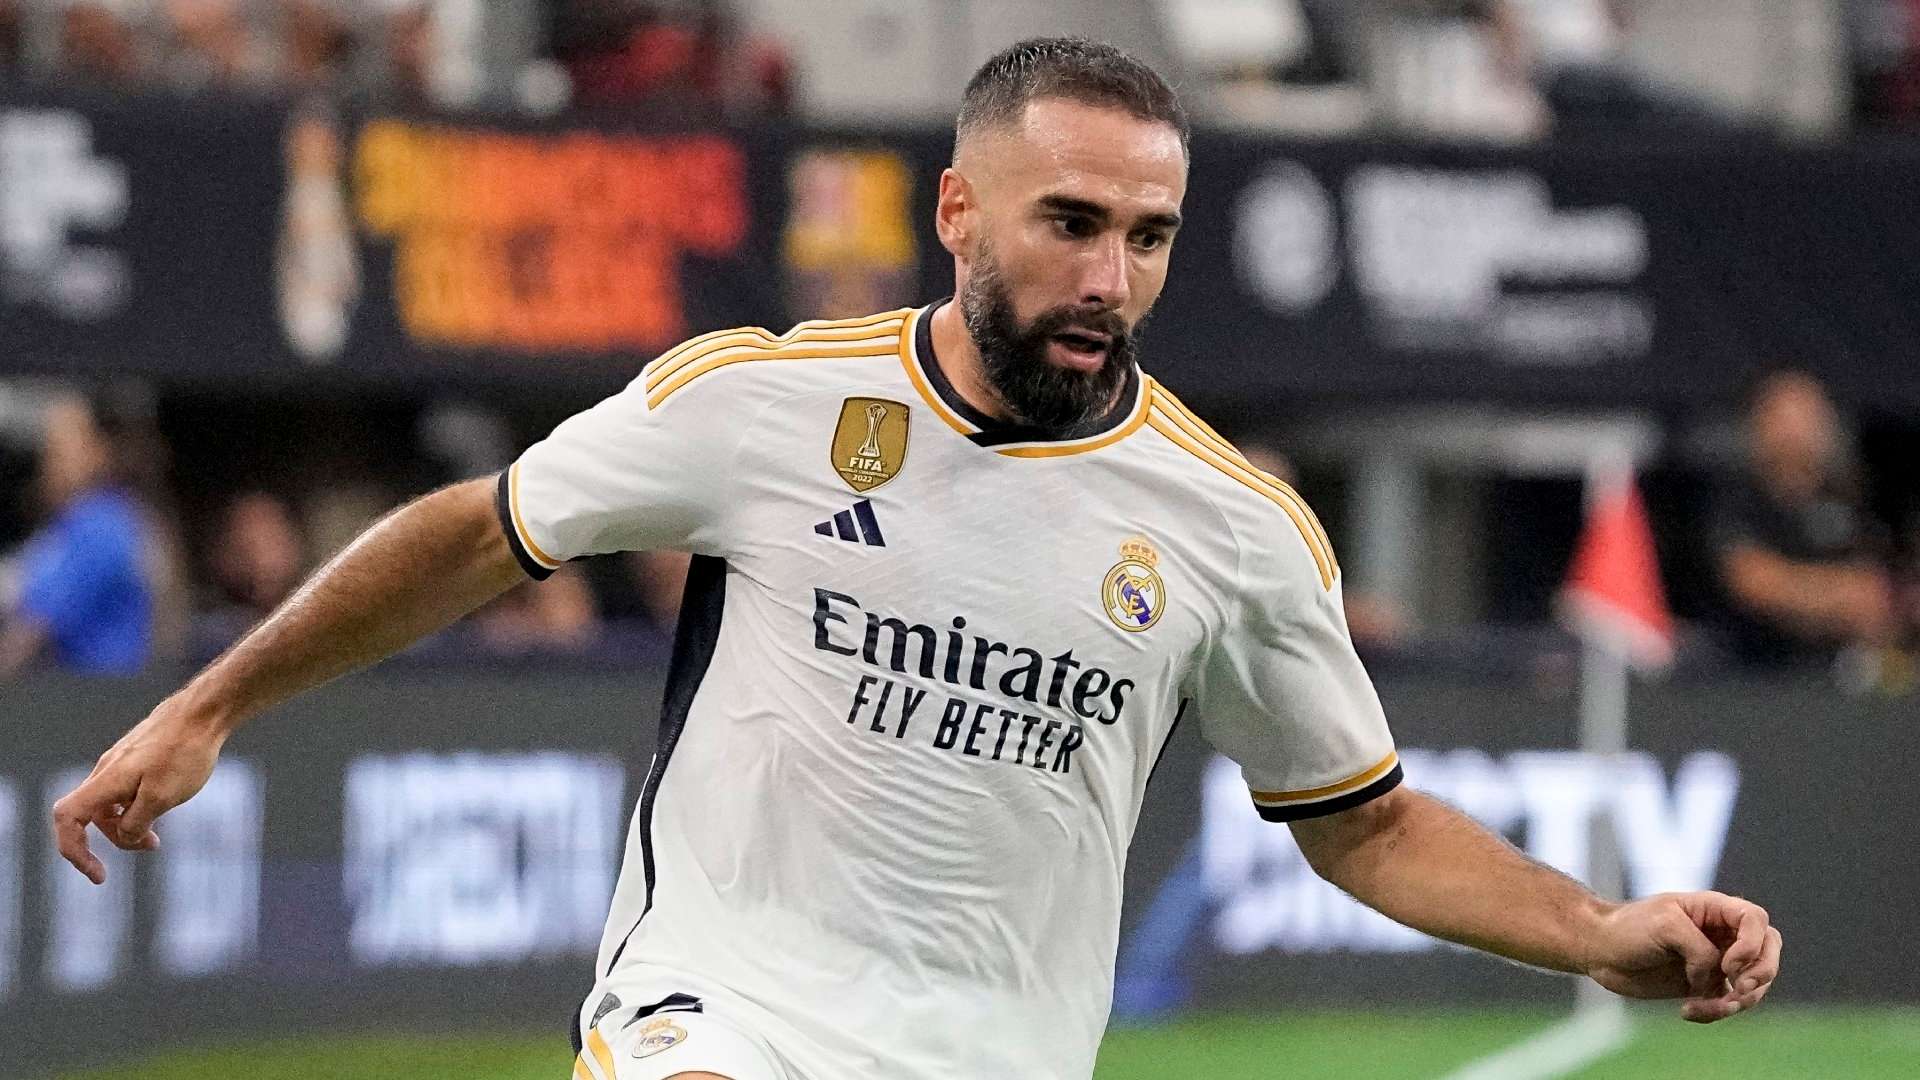 Another injury for Real Madrid! Carlo Ancelotti now without eight players  as Dani Carvajal ruled out for a month with calf problem | Goal.com